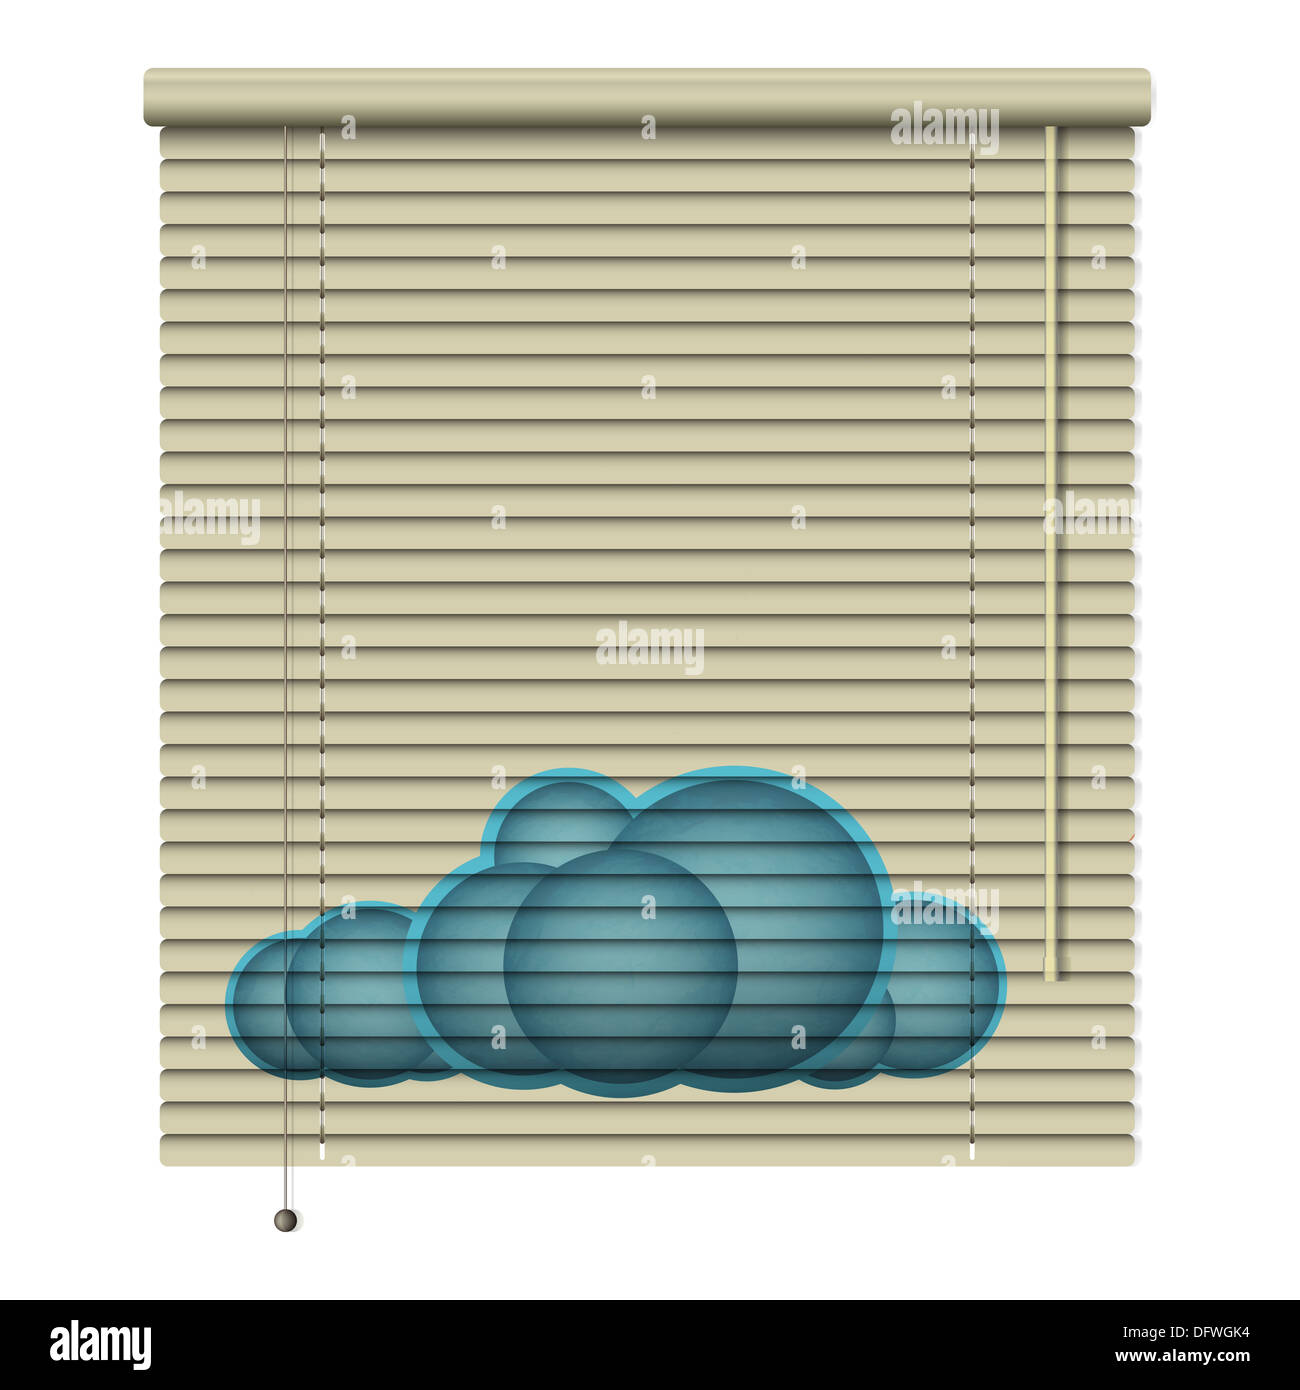 new realistic louvers icon with printed cloud symbol can use like conceptual design Stock Photo